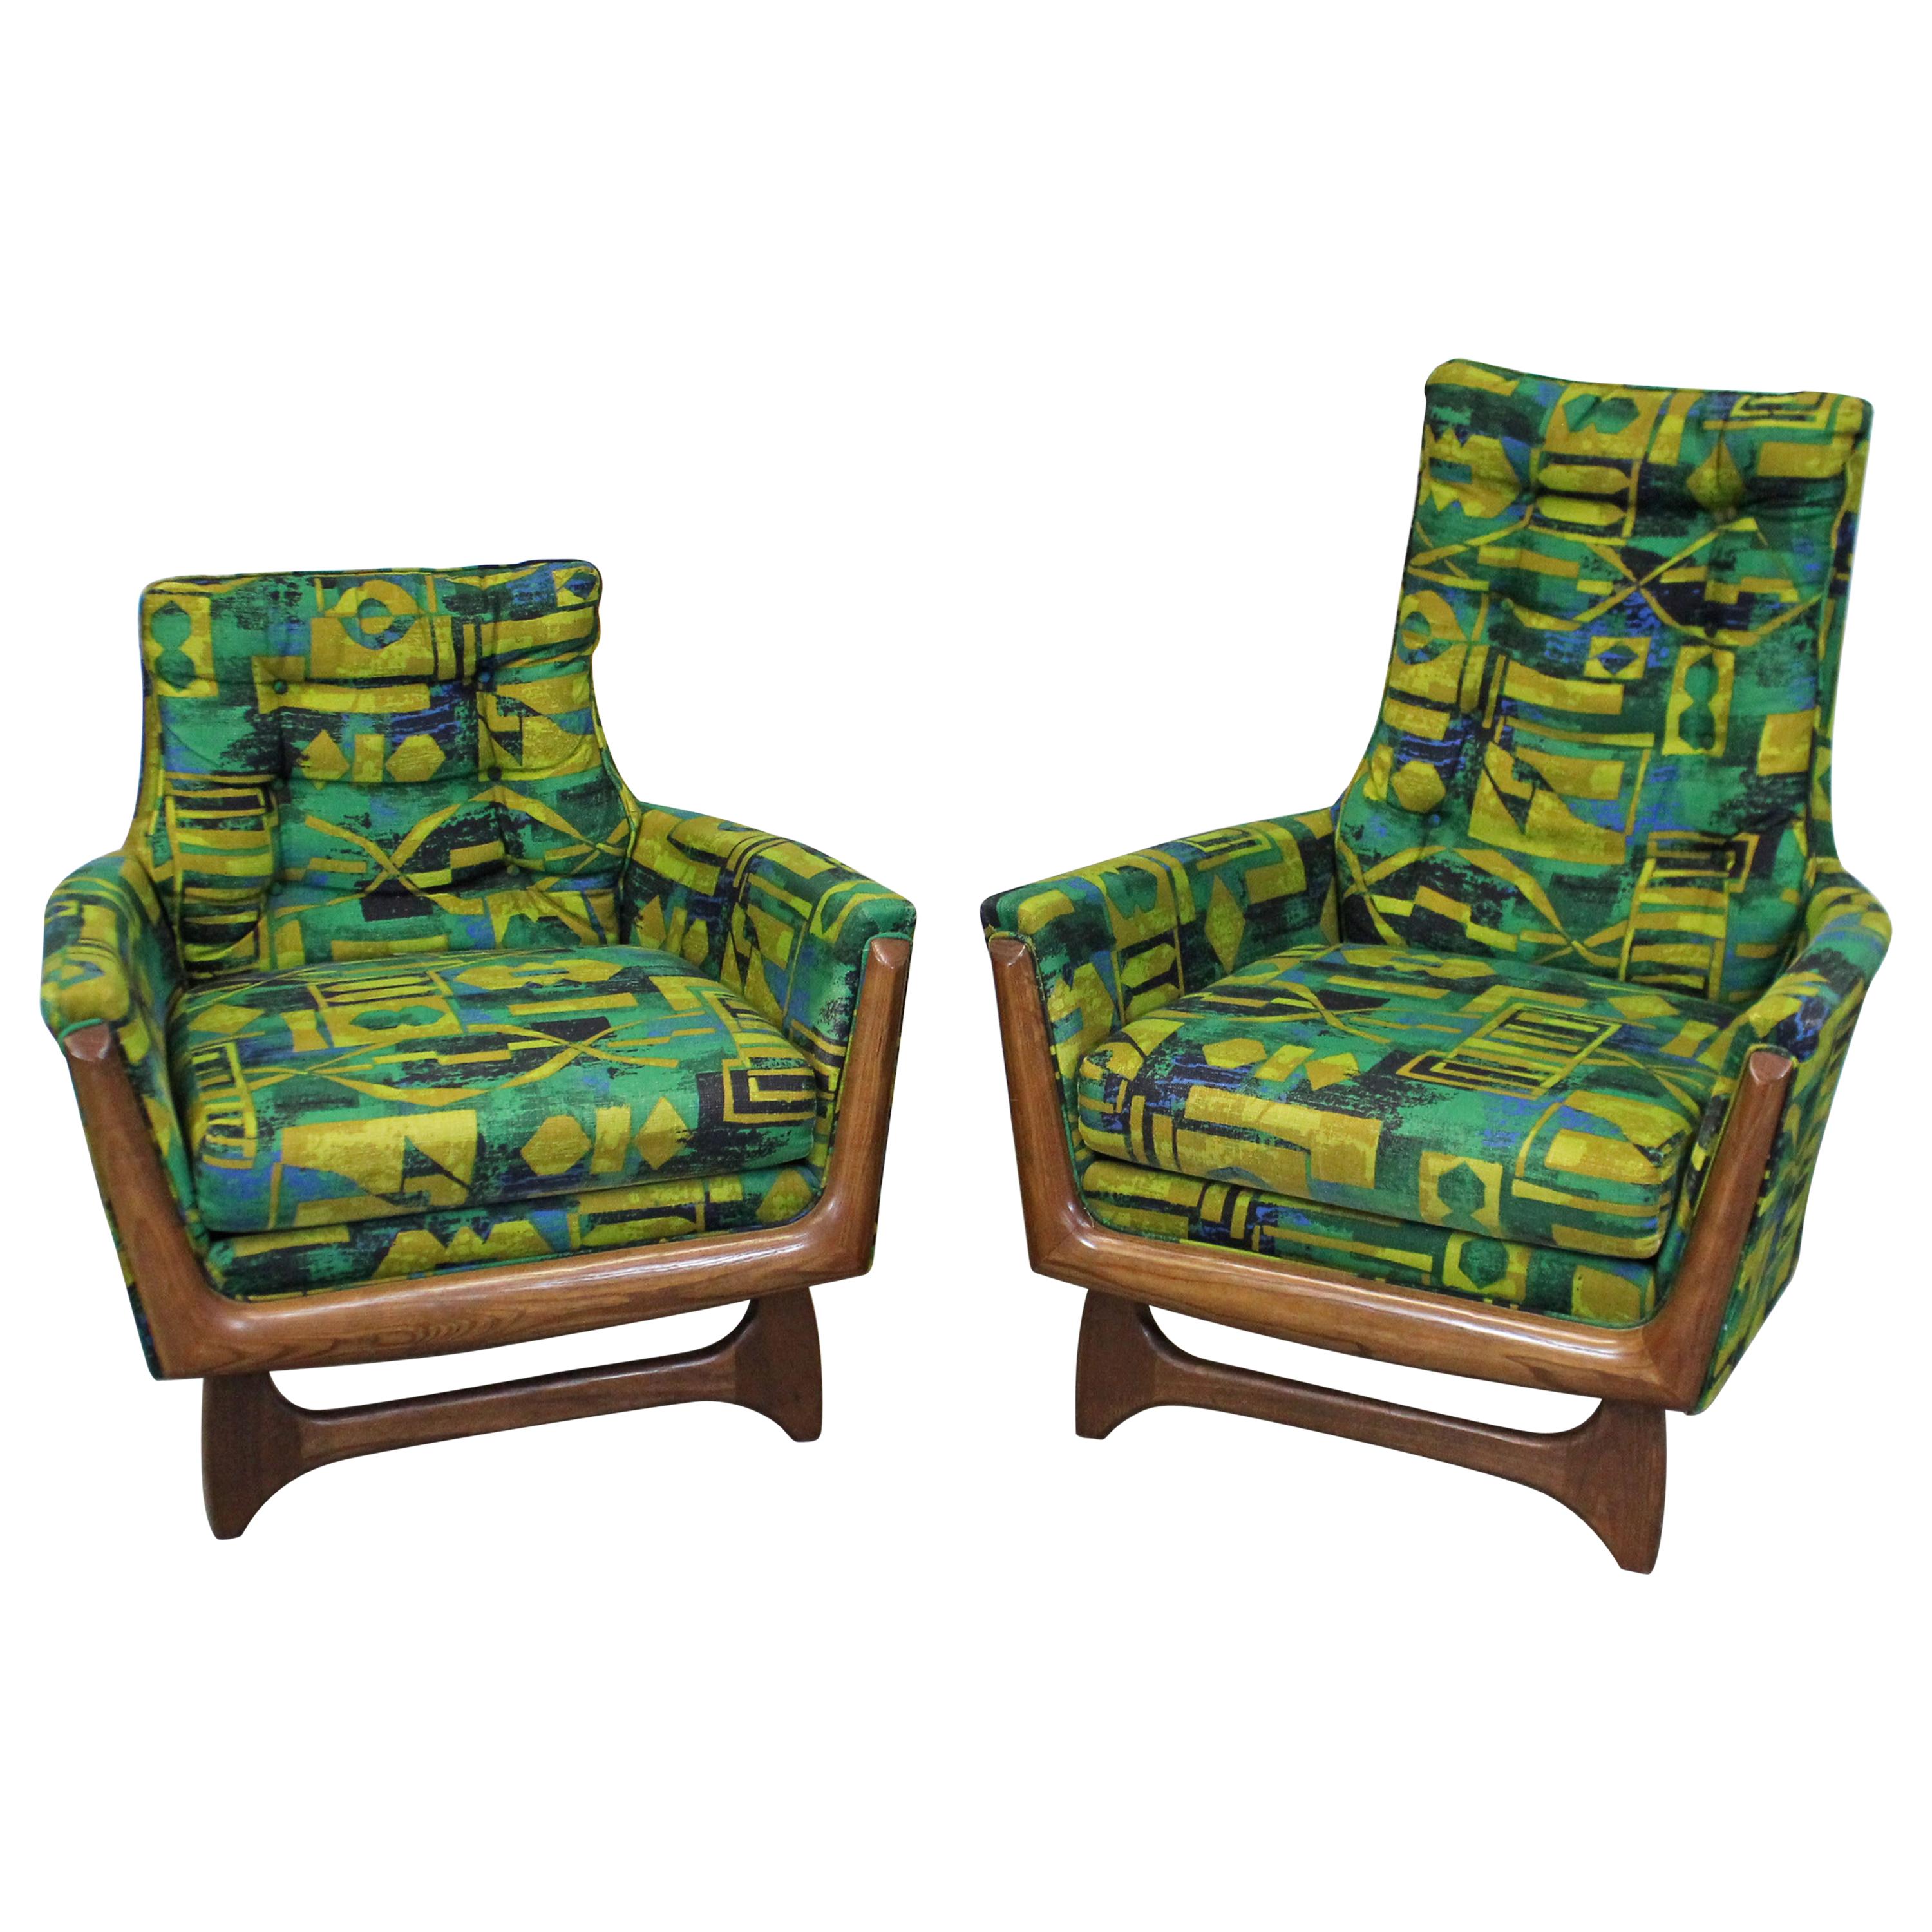 Pair of Mid-Century Modern Adrian Pearsall Style His & Her Lounge Chairs